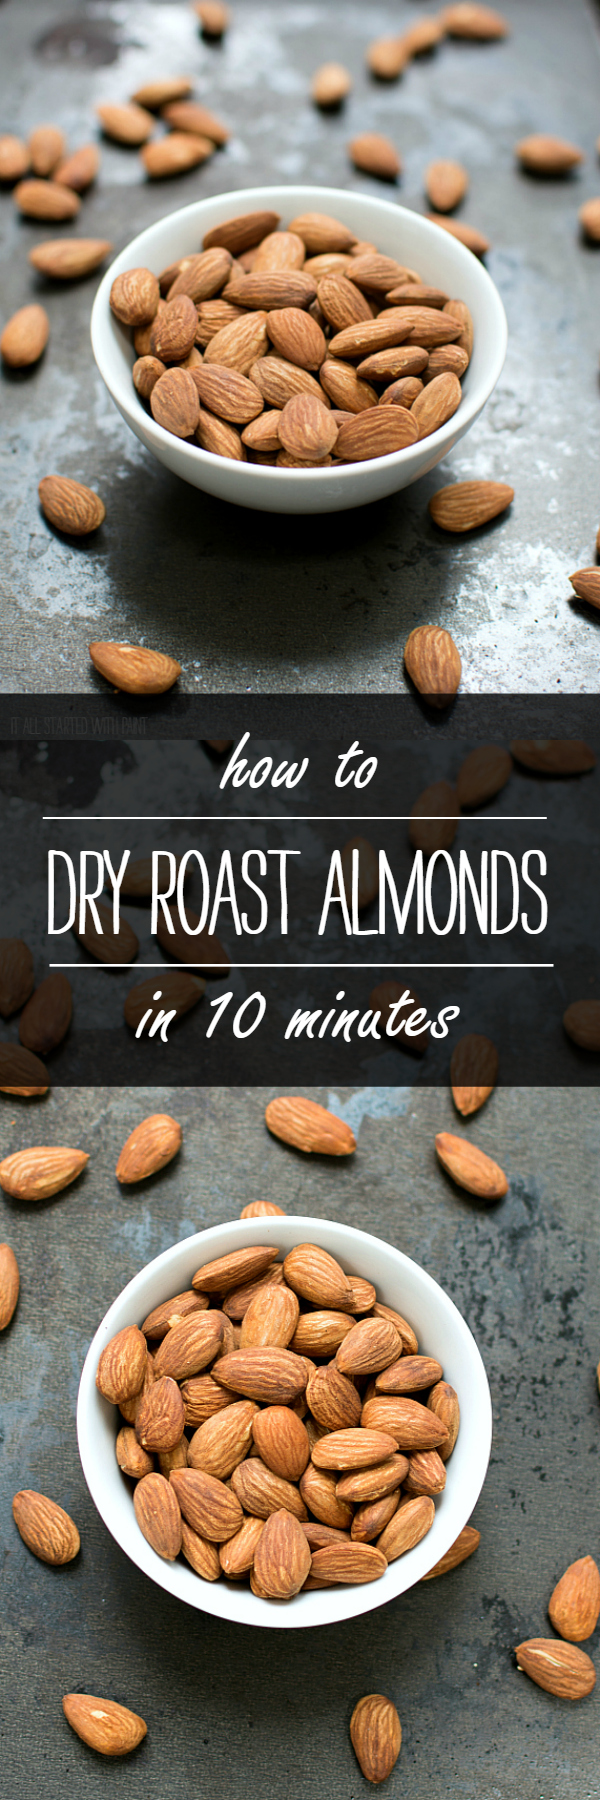 Dry Roasted Almonds: How To Easily Dry Roast in 10 Minutes